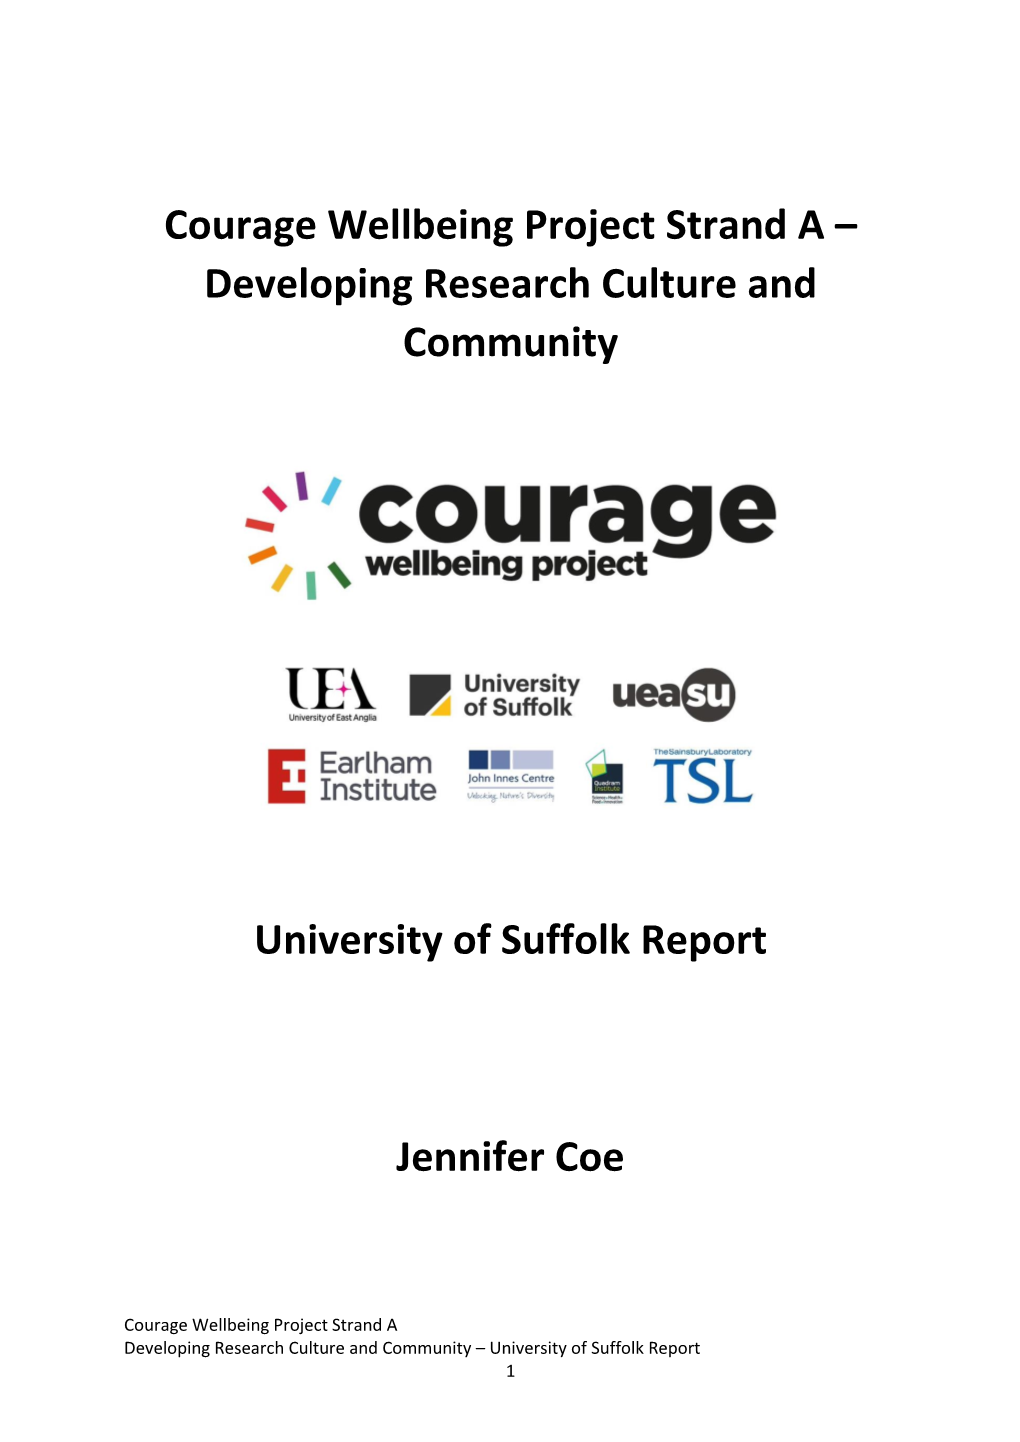 Courage Wellbeing Project Strand a – Developing Research Culture and Community